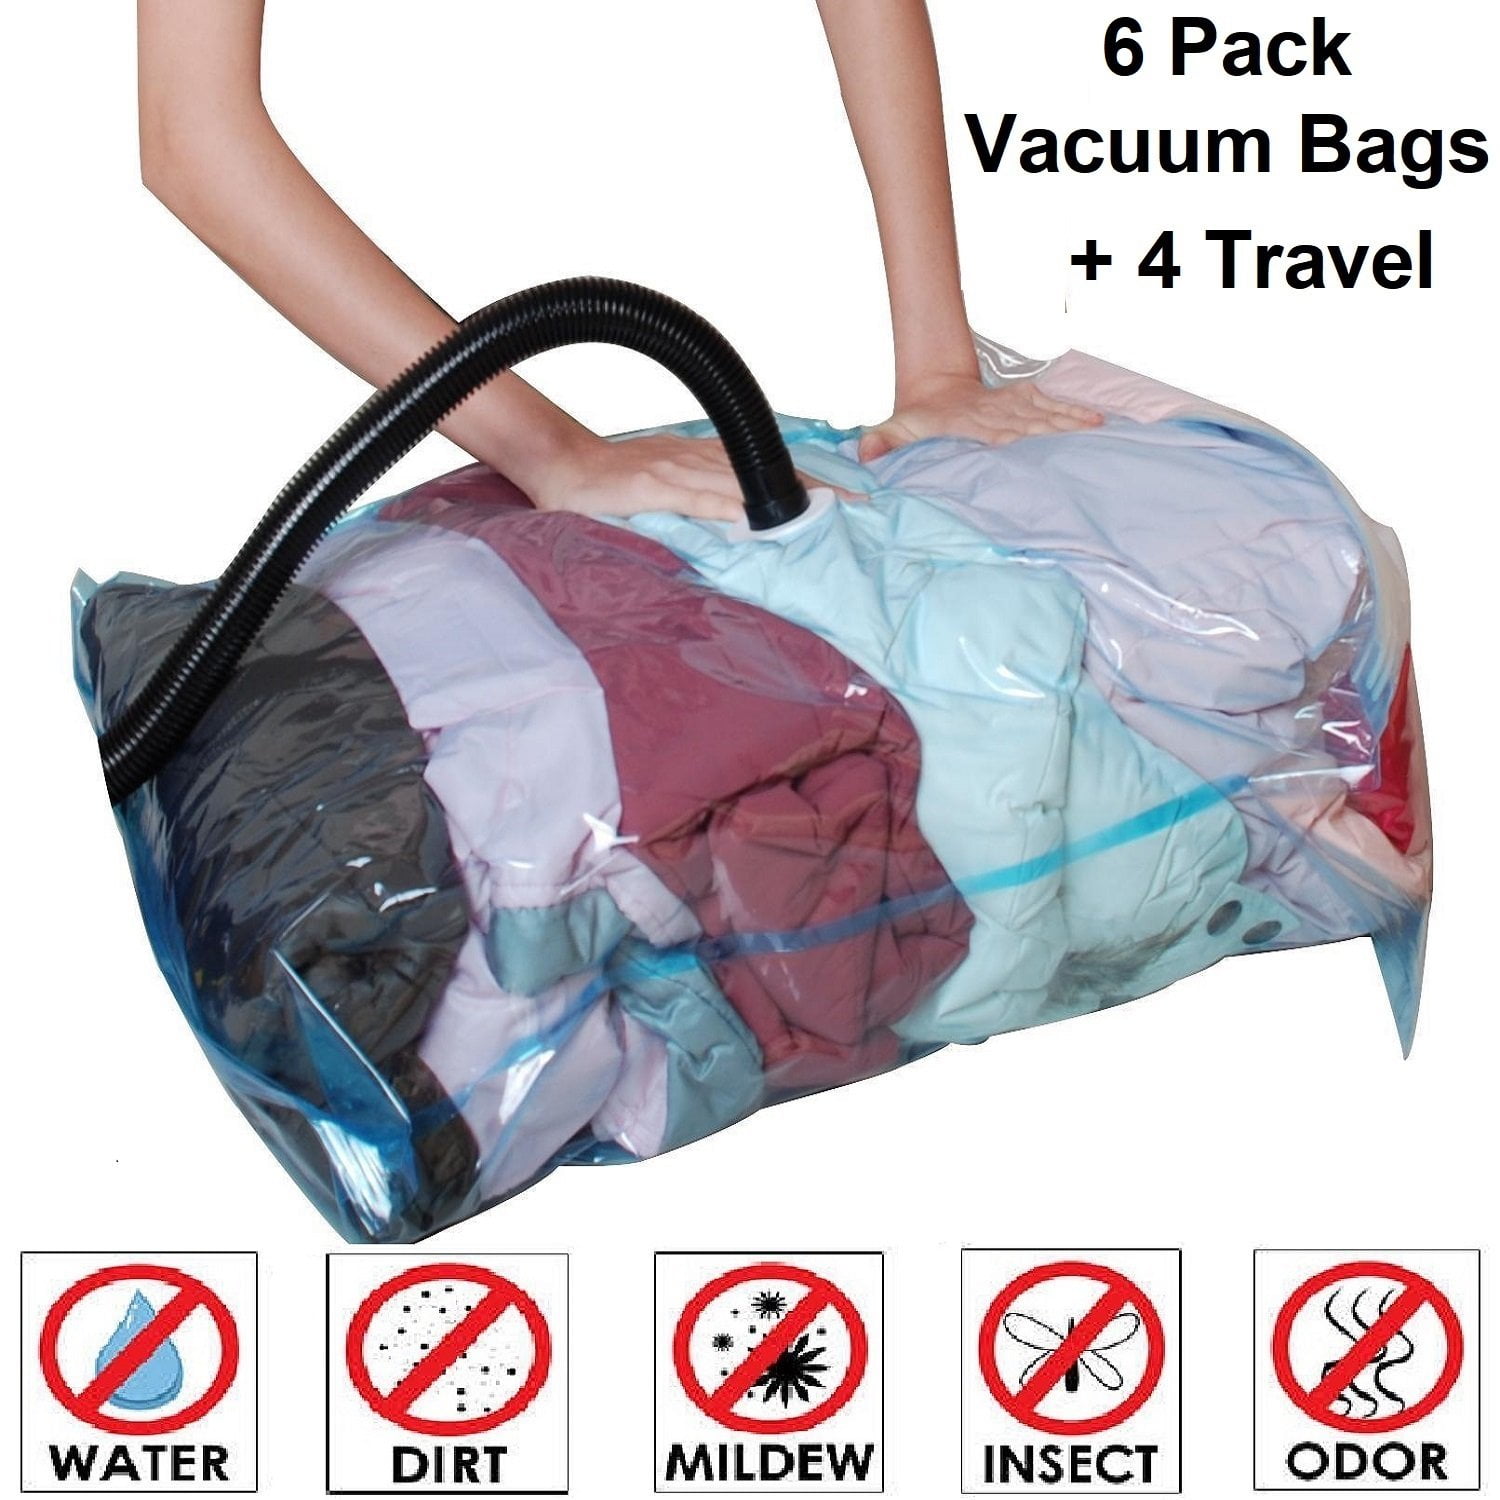 10Pack Travel Space Saver Bags, Reusable MEZOOM Vacuum Travel Storage Bag,  Saves 75% of Storage Space , Roll-Up Compression, No Need For Vacuum